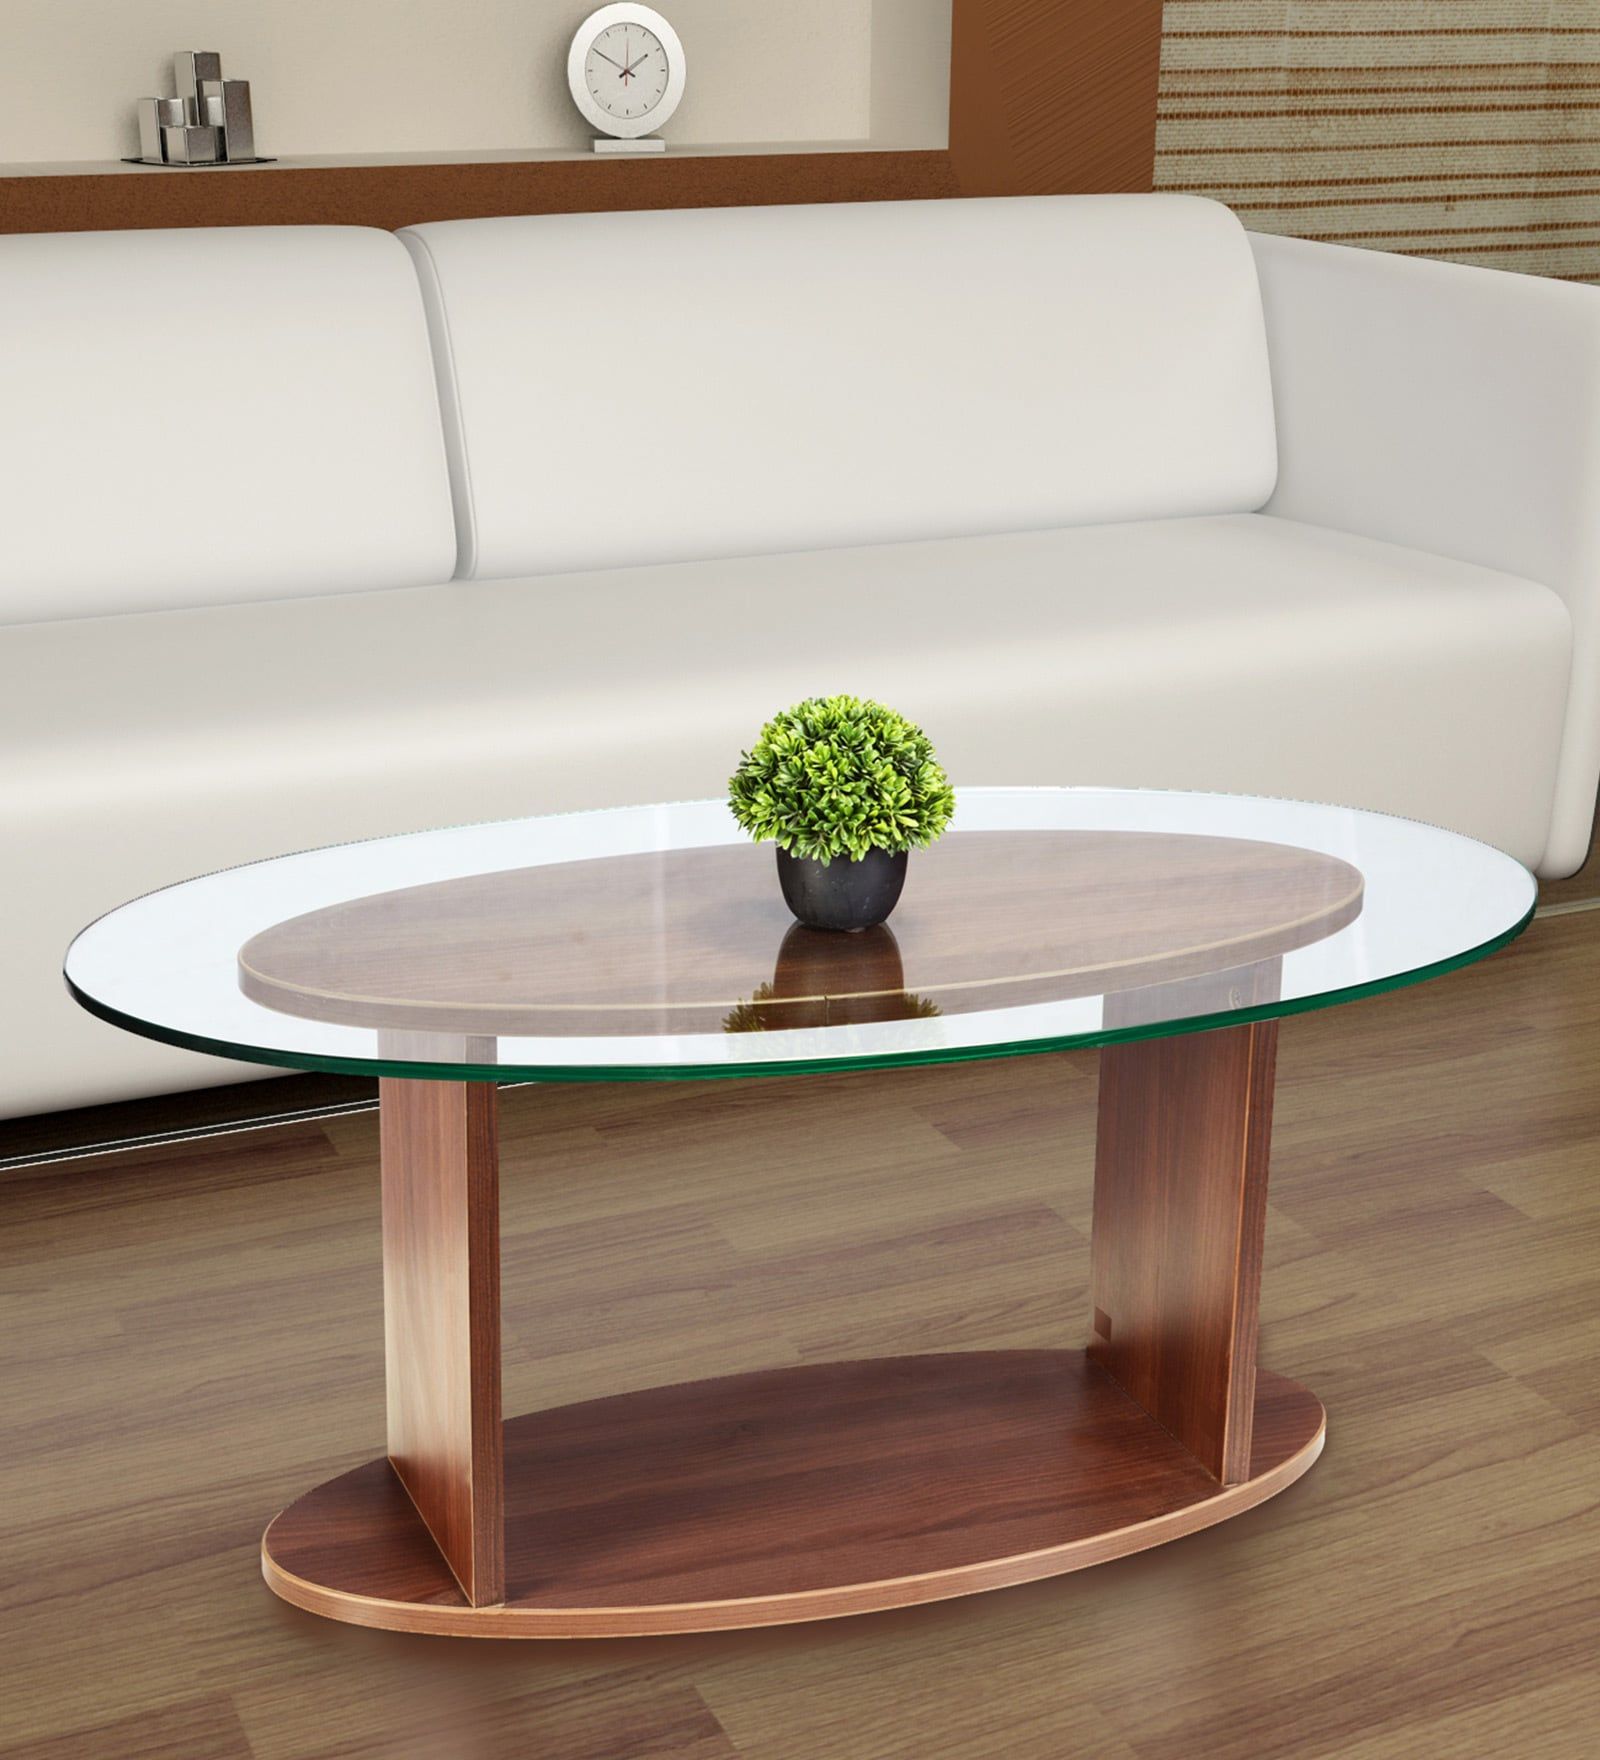 Buy Oval Shaped Glass Top Coffee Table In Walnut Finishaddy Design Regarding Wood Tempered Glass Top Coffee Tables (Gallery 10 of 20)